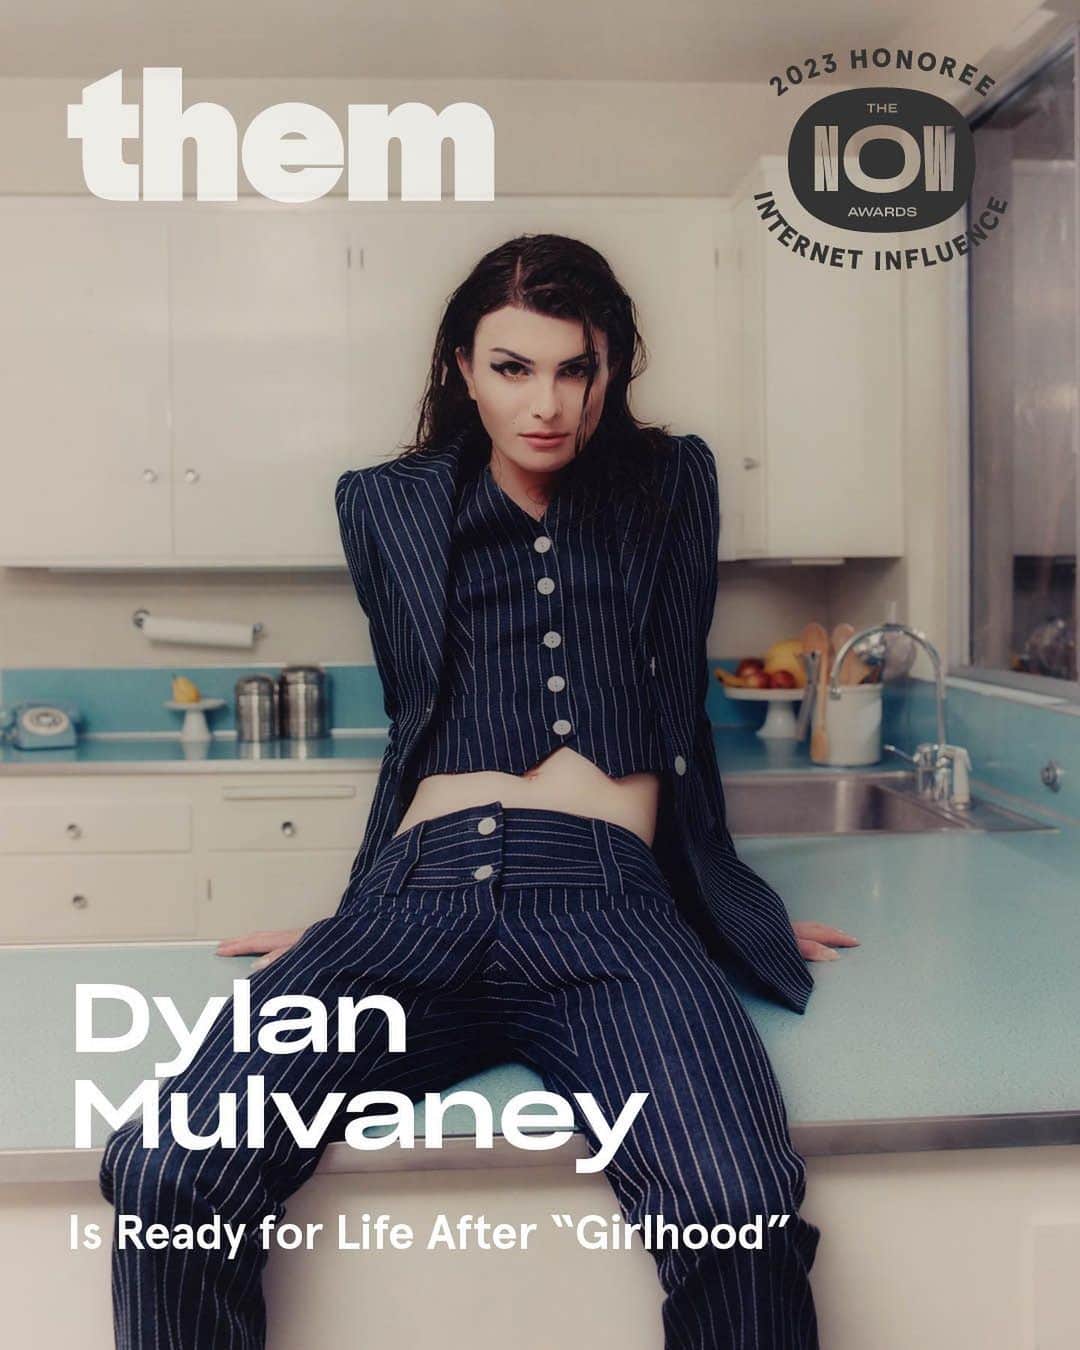 DYLAN MULVANEYのインスタグラム：「My first cover story ❣️ link in bio @them    “I was so scared of being perceived as this masculine monster in that first year…I thought there was safety in hyperfemininity. But now that even that’s getting used against me, I was like, screw it — let’s pick the suit. If people want to equate me with just dresses and makeup, let’s show them this.”   Gorgeous writer @msclickbait  Photographer: Kate Biel - @katebiel  ·  Stylist: Amanda Mariko - @mandymariko  ·  Hair: Angelina Panelli - @angelinapanelli  ·  Makeup: Doniela Davy - @donni.davy  ·  Nails: Rachel Messick -  @rachel.messick  ·  Production: Hyperion LA - @hyperion.la  ·  Editor-in-Chief: Sarah Burke - @sarahlubyburke  ·  Art Director: Wesley Johnson - @wslyjhnsn  ·  Culture & Entertainment Editor: Samantha Allen - @neebess ·  Talent Director: Keaton Bell - @keaton.kilde.bell  ·  PR: @teamid」